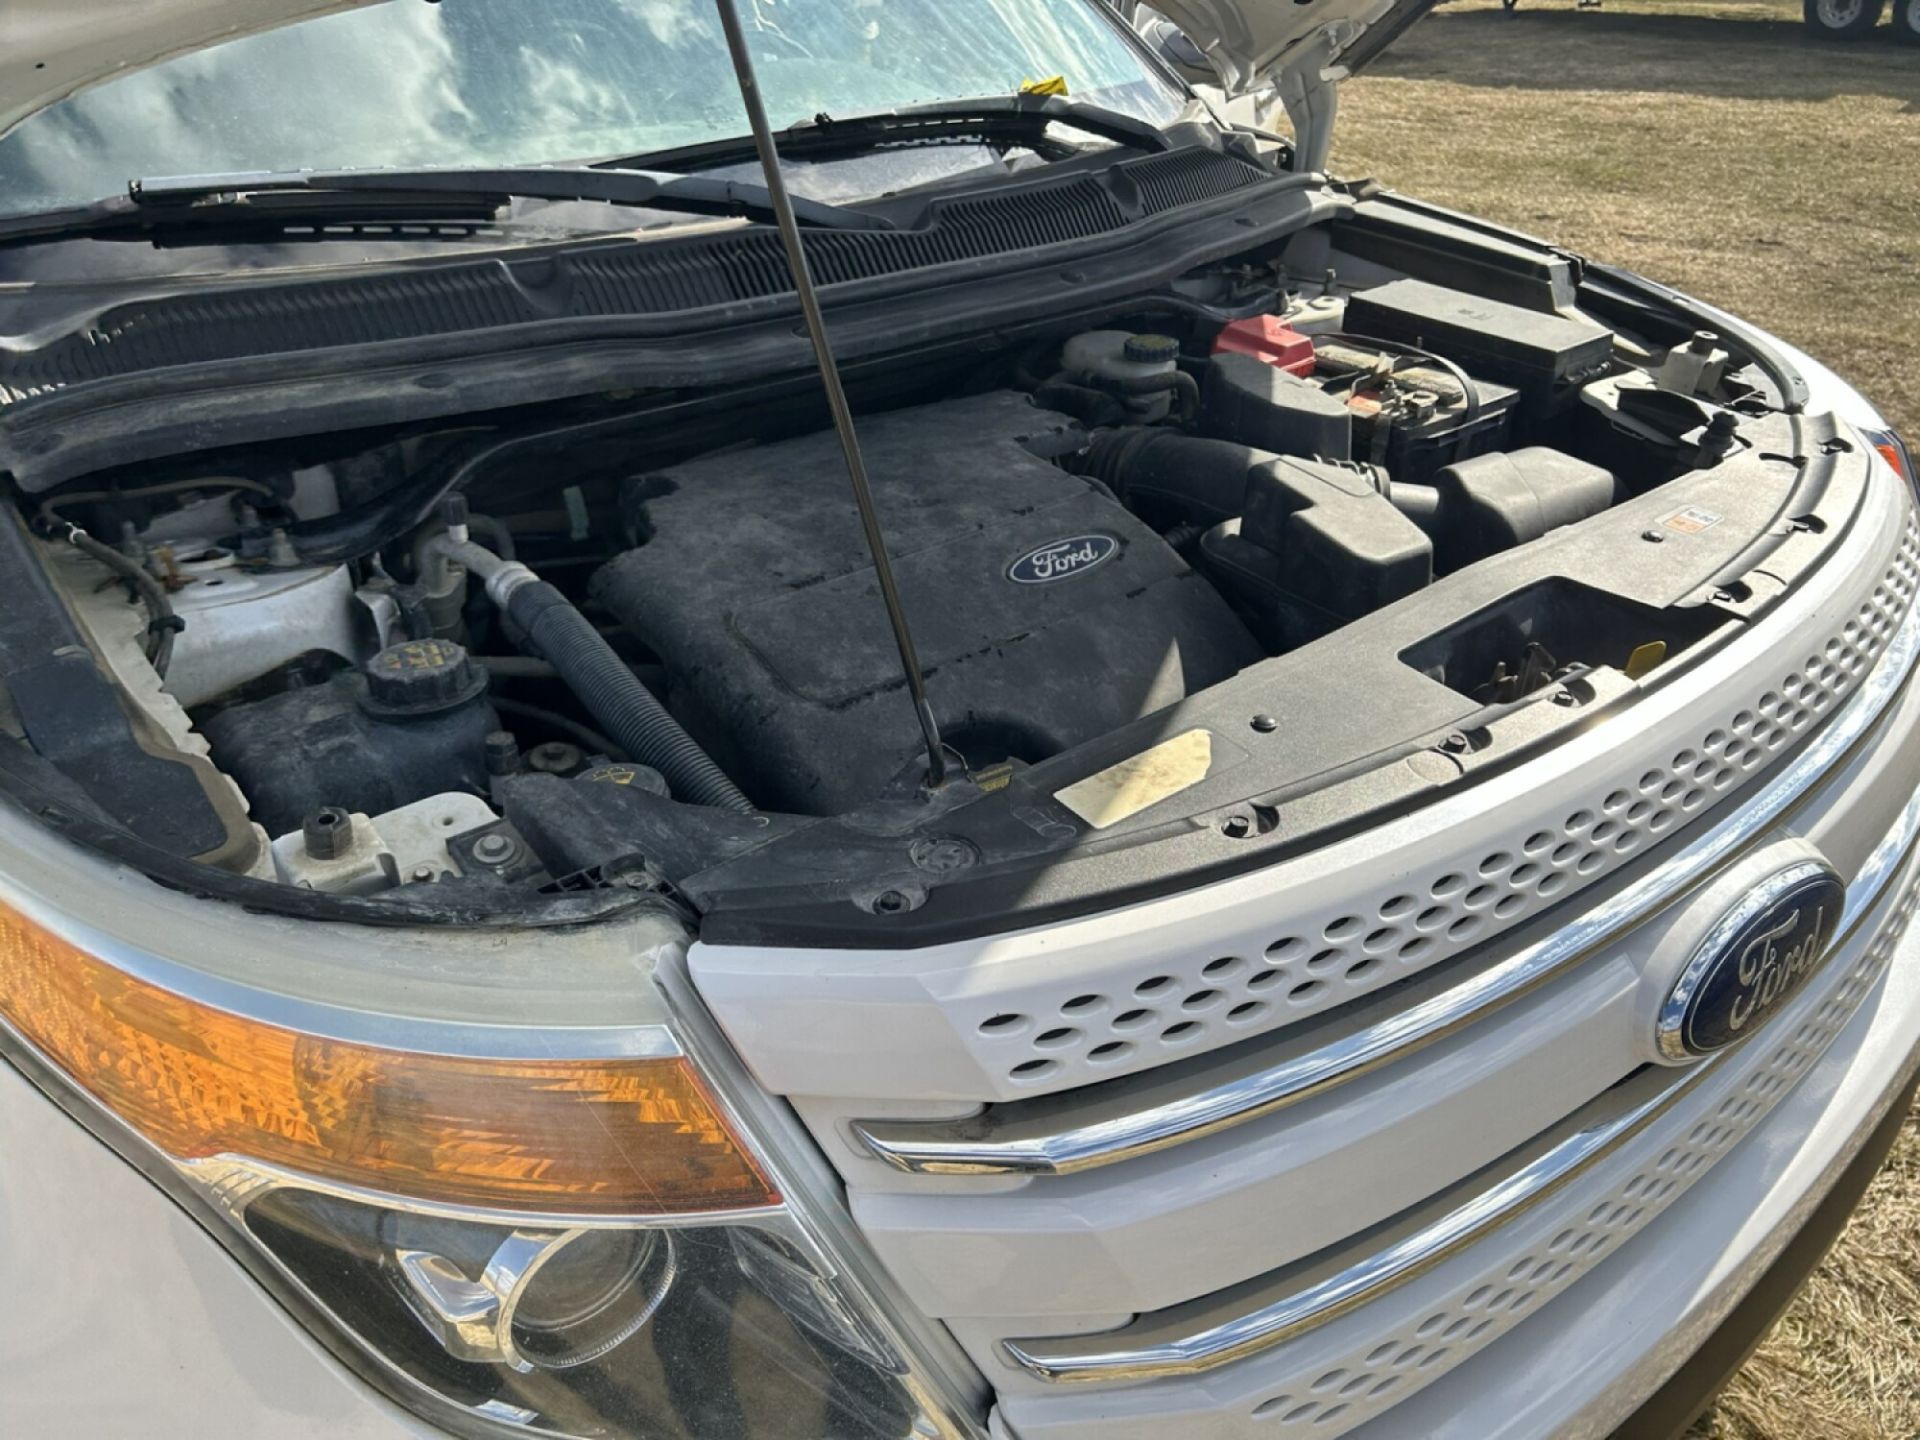 2011 FORD EXPLORER SUV LIMITED, FULL LOAD, AWD. 3.5L V6 - NOTE** TRANS NEEDS REPAIR OR REPLACEMENT - Image 13 of 15